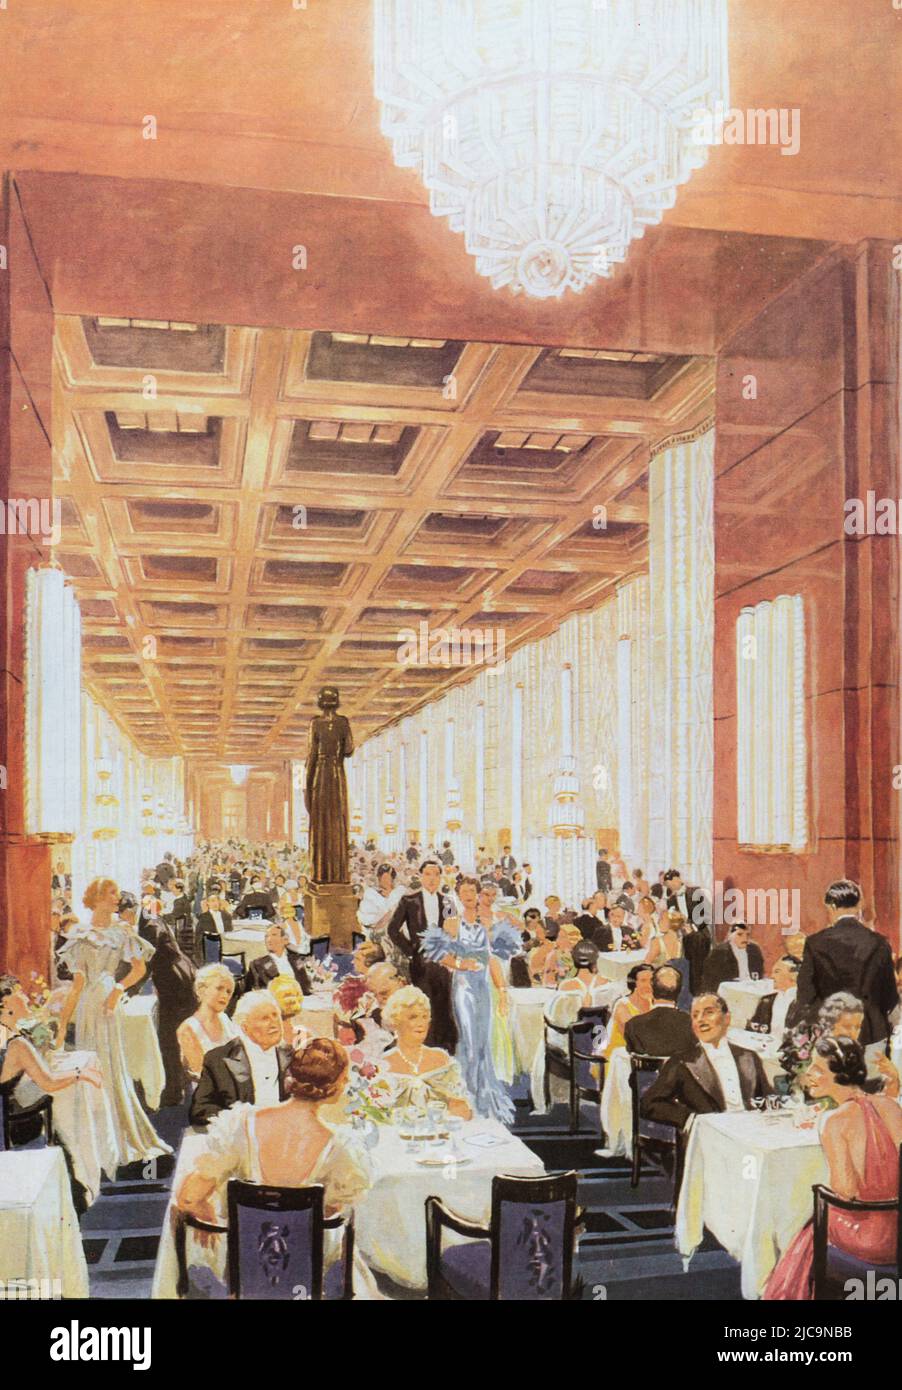 Eng translation : ' The Normandy liner - The first class dining room ' - Original in French : ' Le paquebot Normandie - La salle à manger des premiers classes   ' - Extract from ' L'Illustration, Journal Universel ' Vintage French illustrated newspaper 1935 Stock Photo